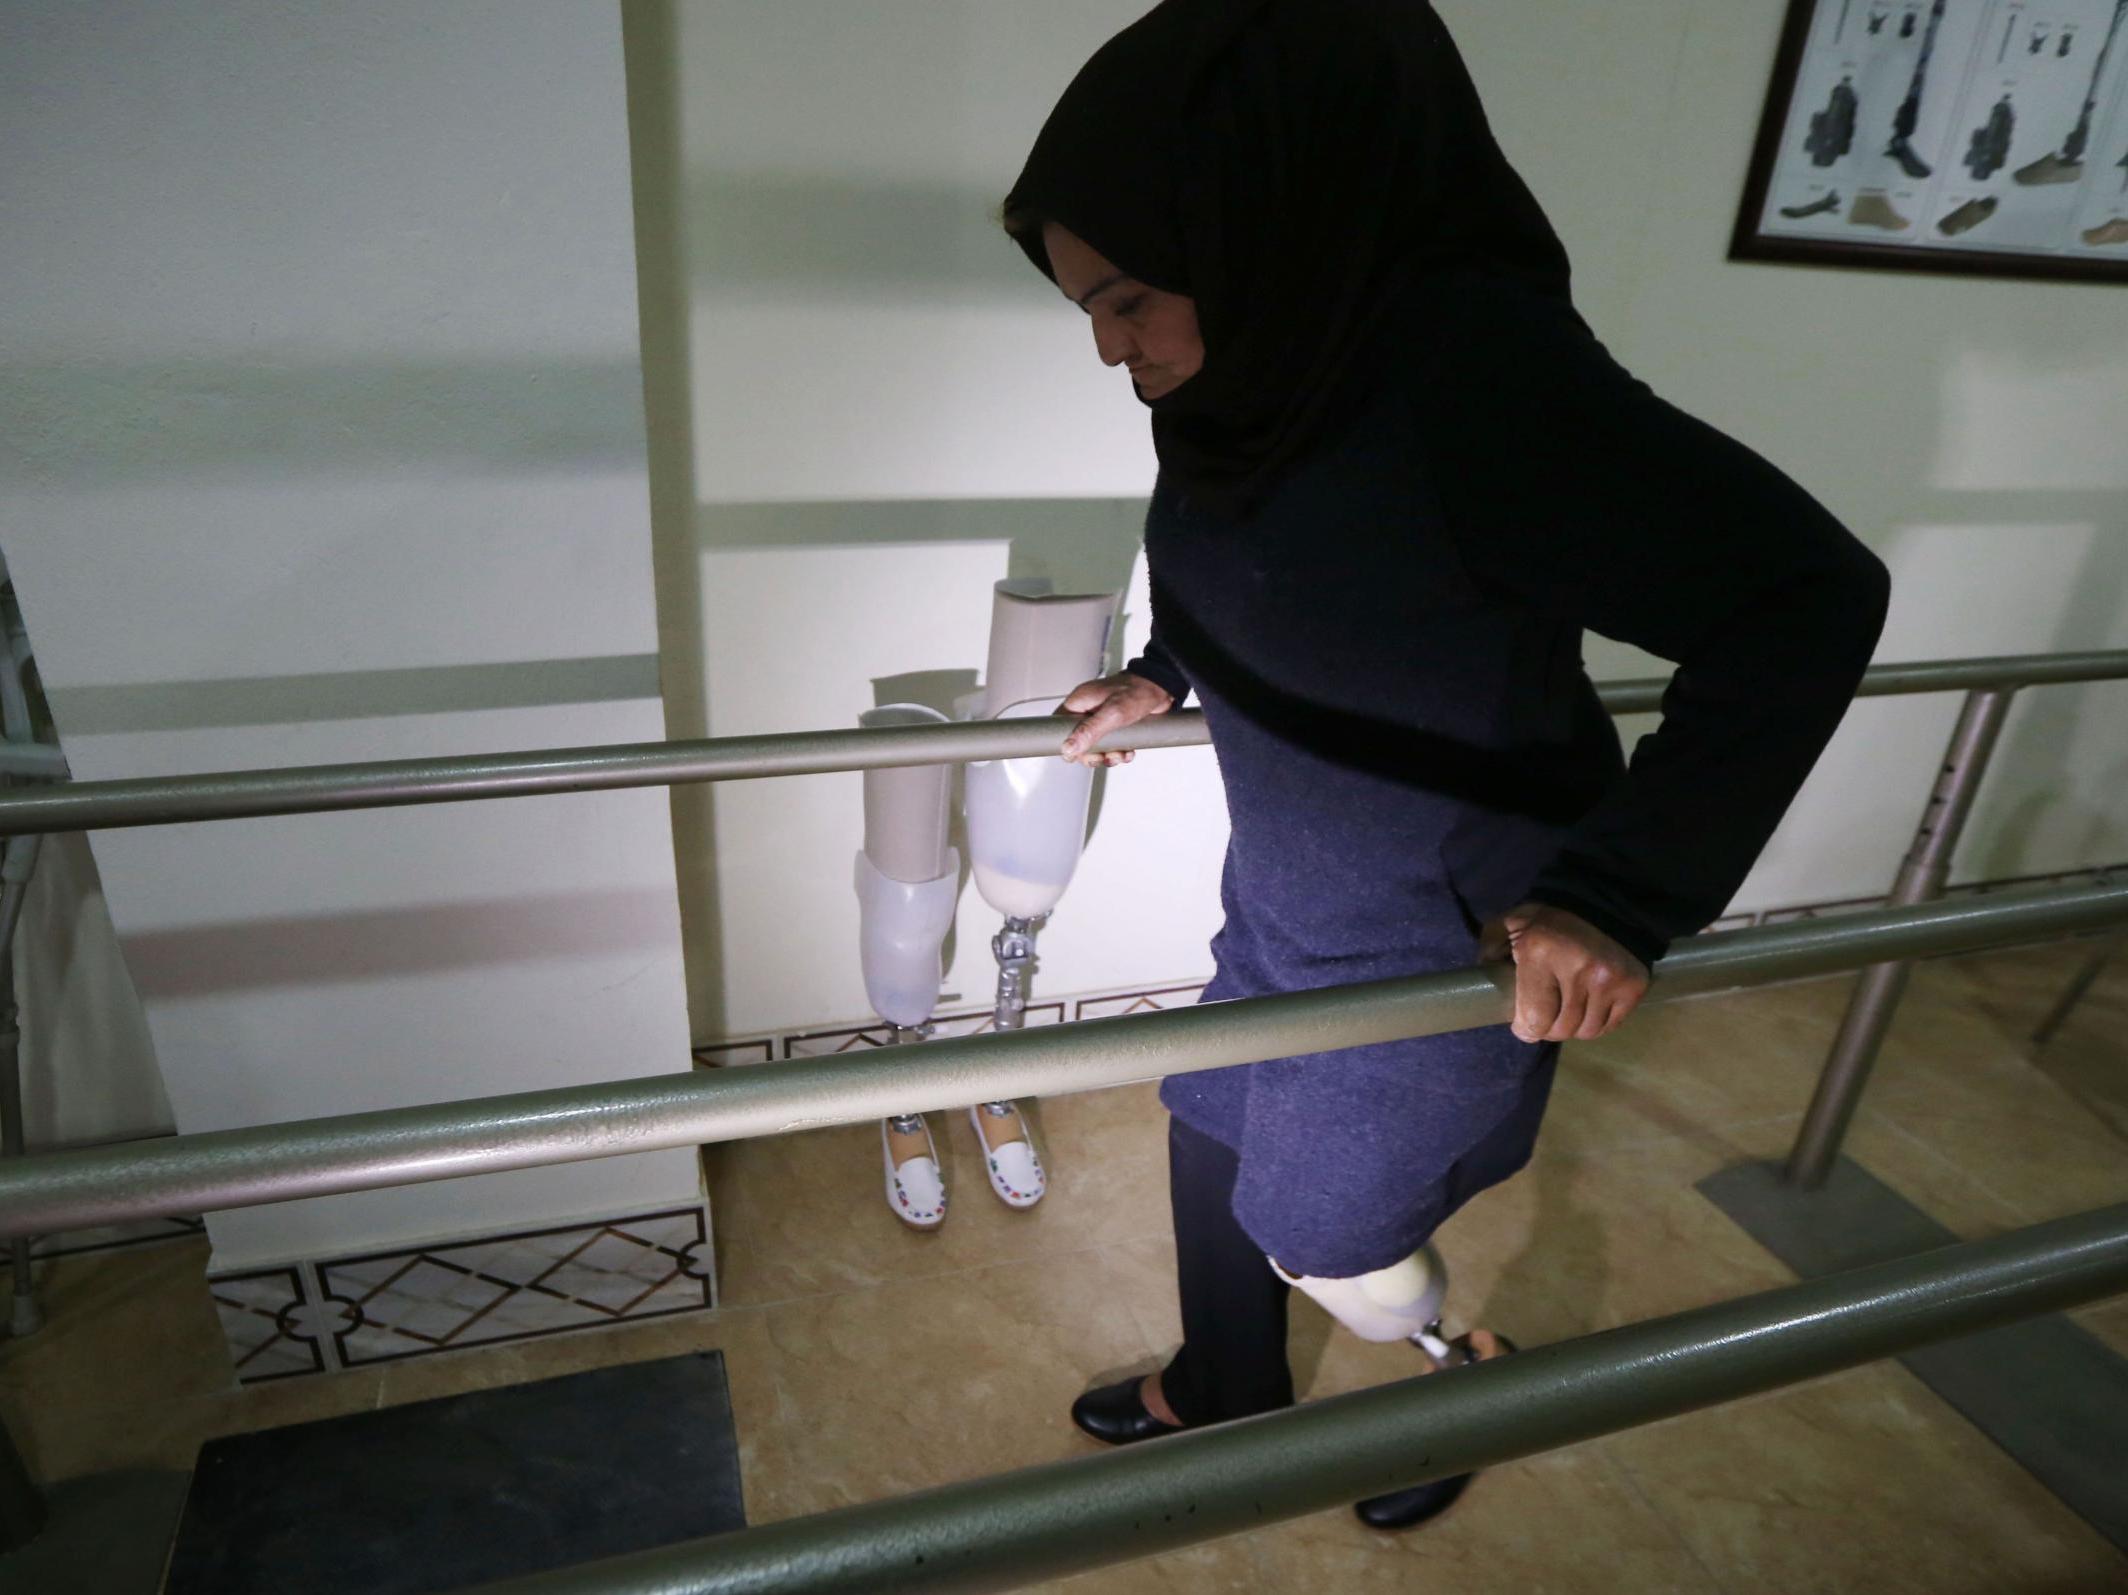 Nofa Mohammed, a 45-year-old Iraqi woman from Mosul who lost her leg in a 2016 attack by Isis fighters, tries a prosthetic leg